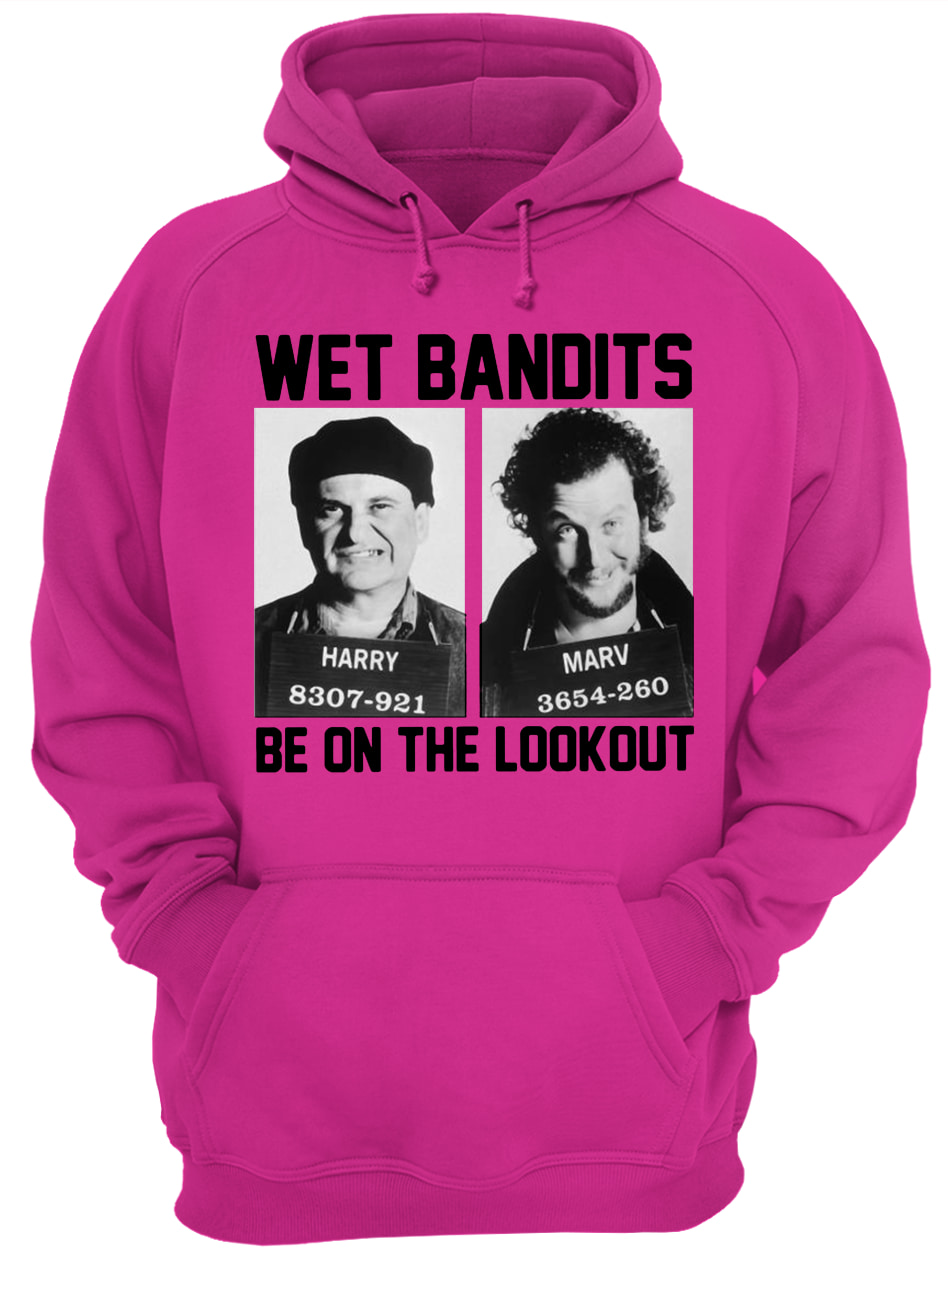 Harry and marv wet bandits be on the lookout home alone hoodie